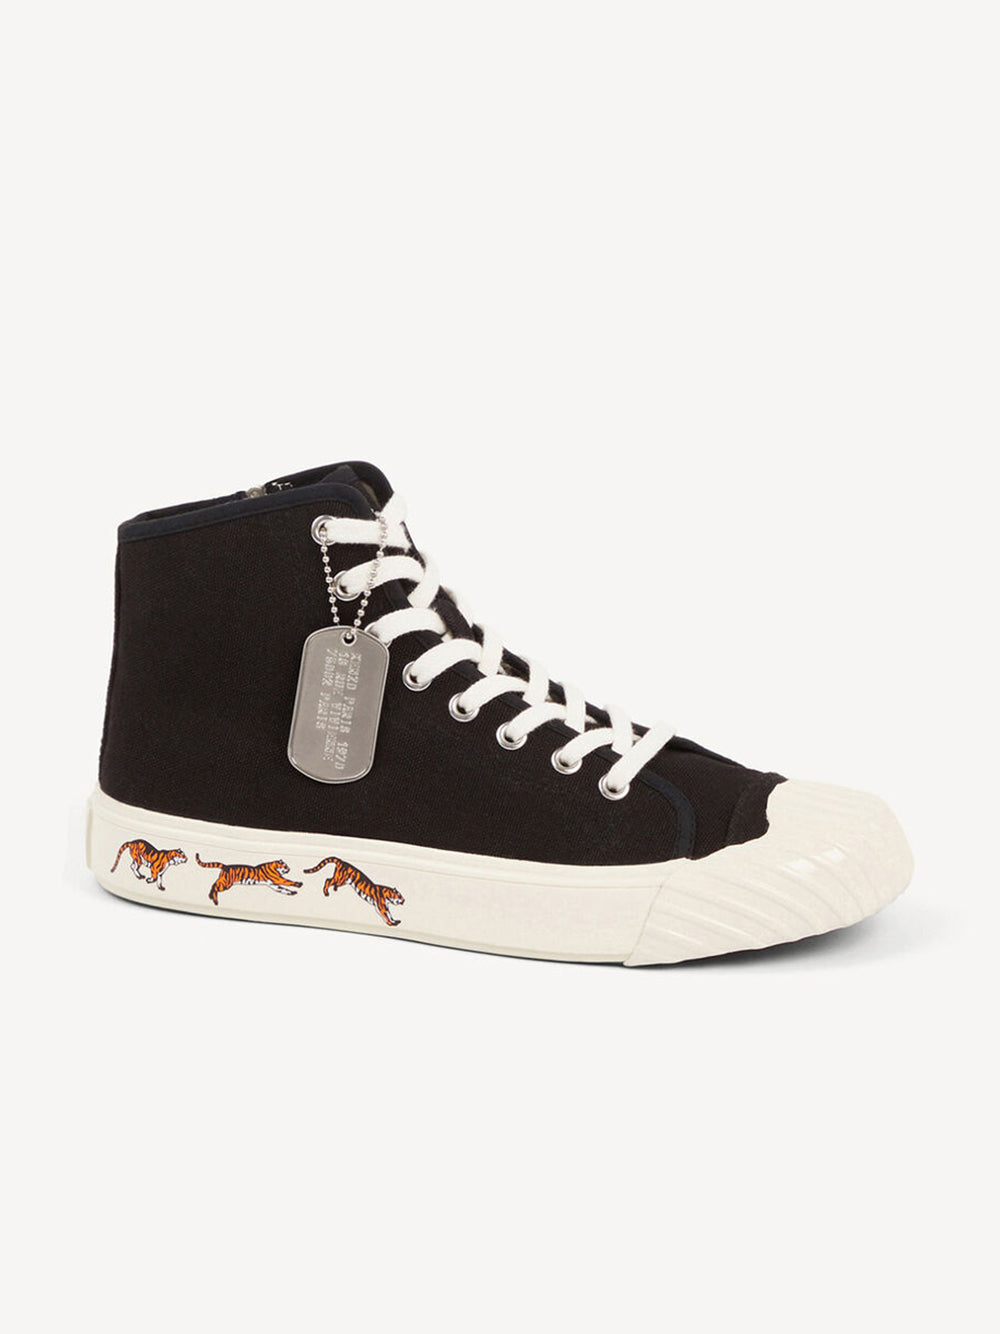 KENZO BLACK ANKLE CANVAS SNEAKERS